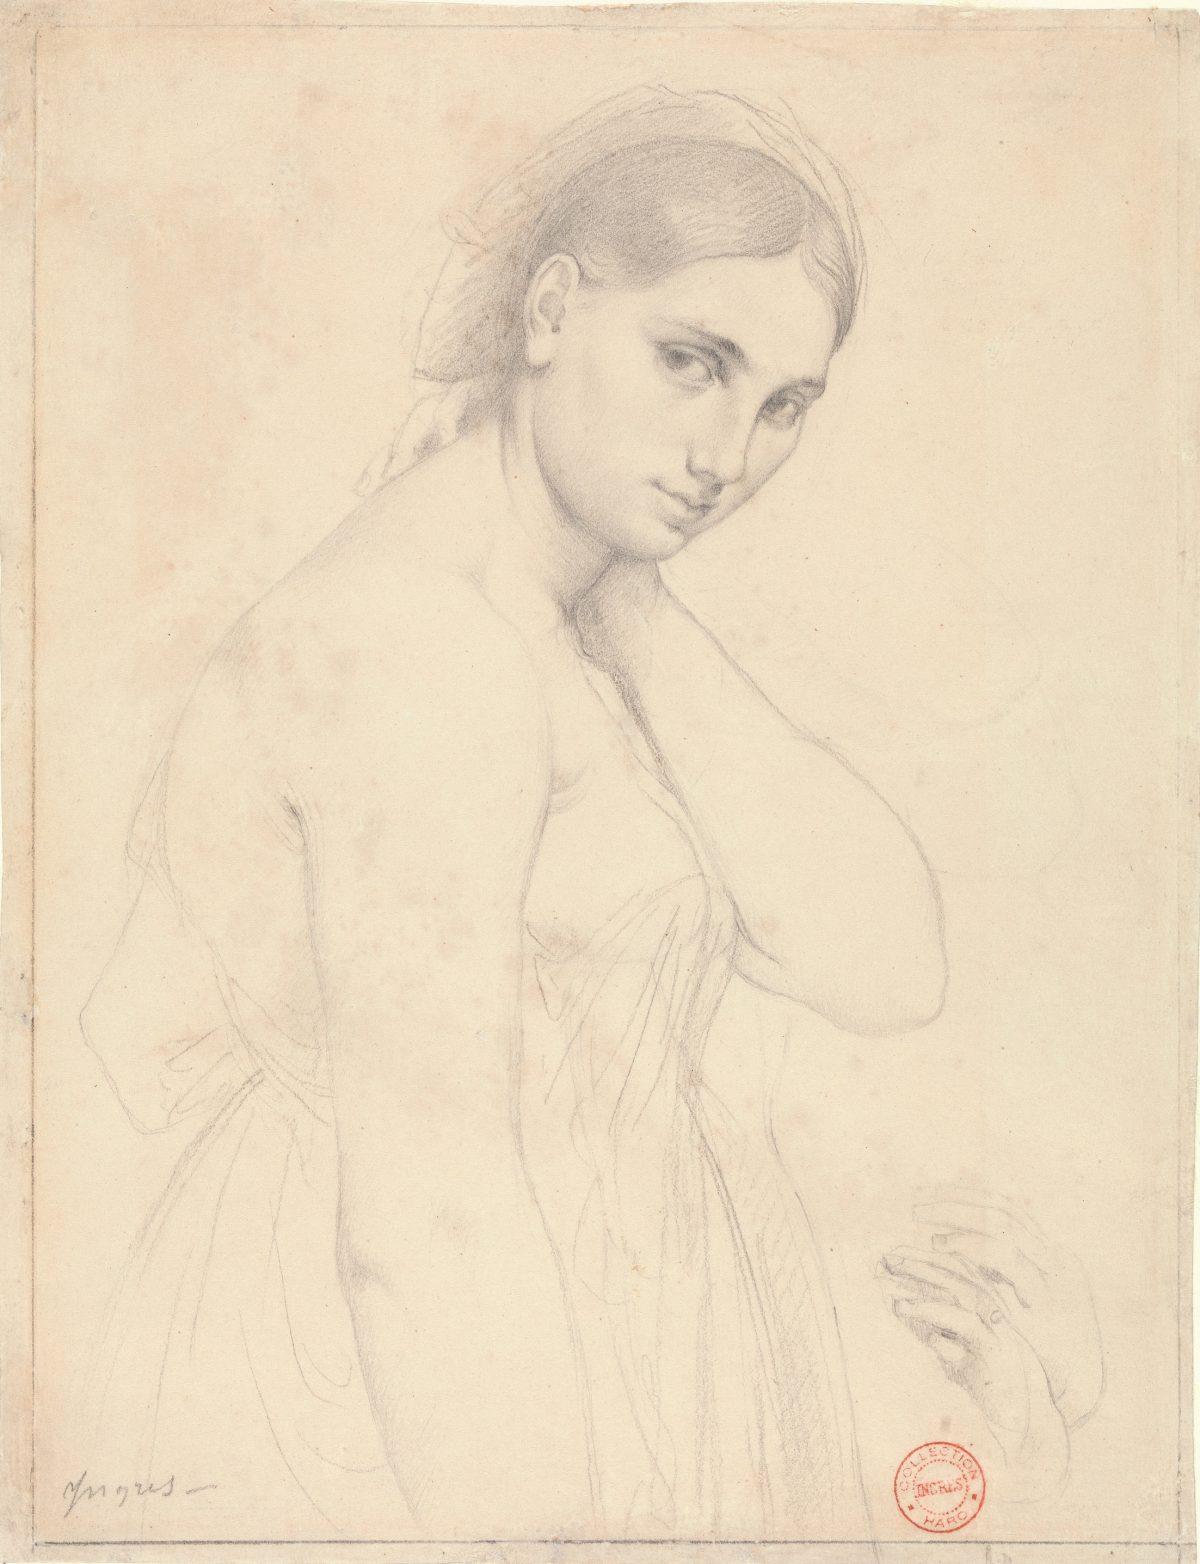 Study for "Raphael and the Fornarina," circa 1814 by Jean Auguste Dominique Ingres (1780–1867).<br/>Graphite on white wove paper, The Metropolitan Museum of Art, Robert Lehman Collection, 1975. (The Metropolitan Museum of Art)